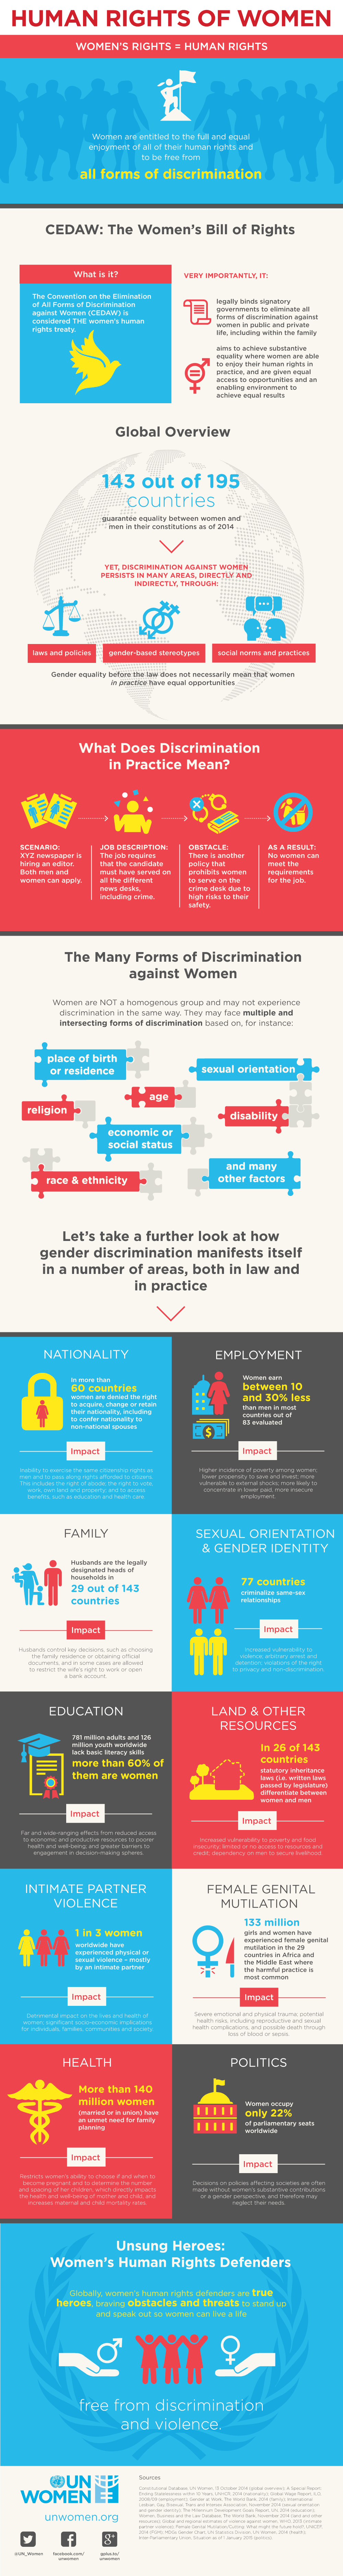 Infographic: Human Rights of Women 